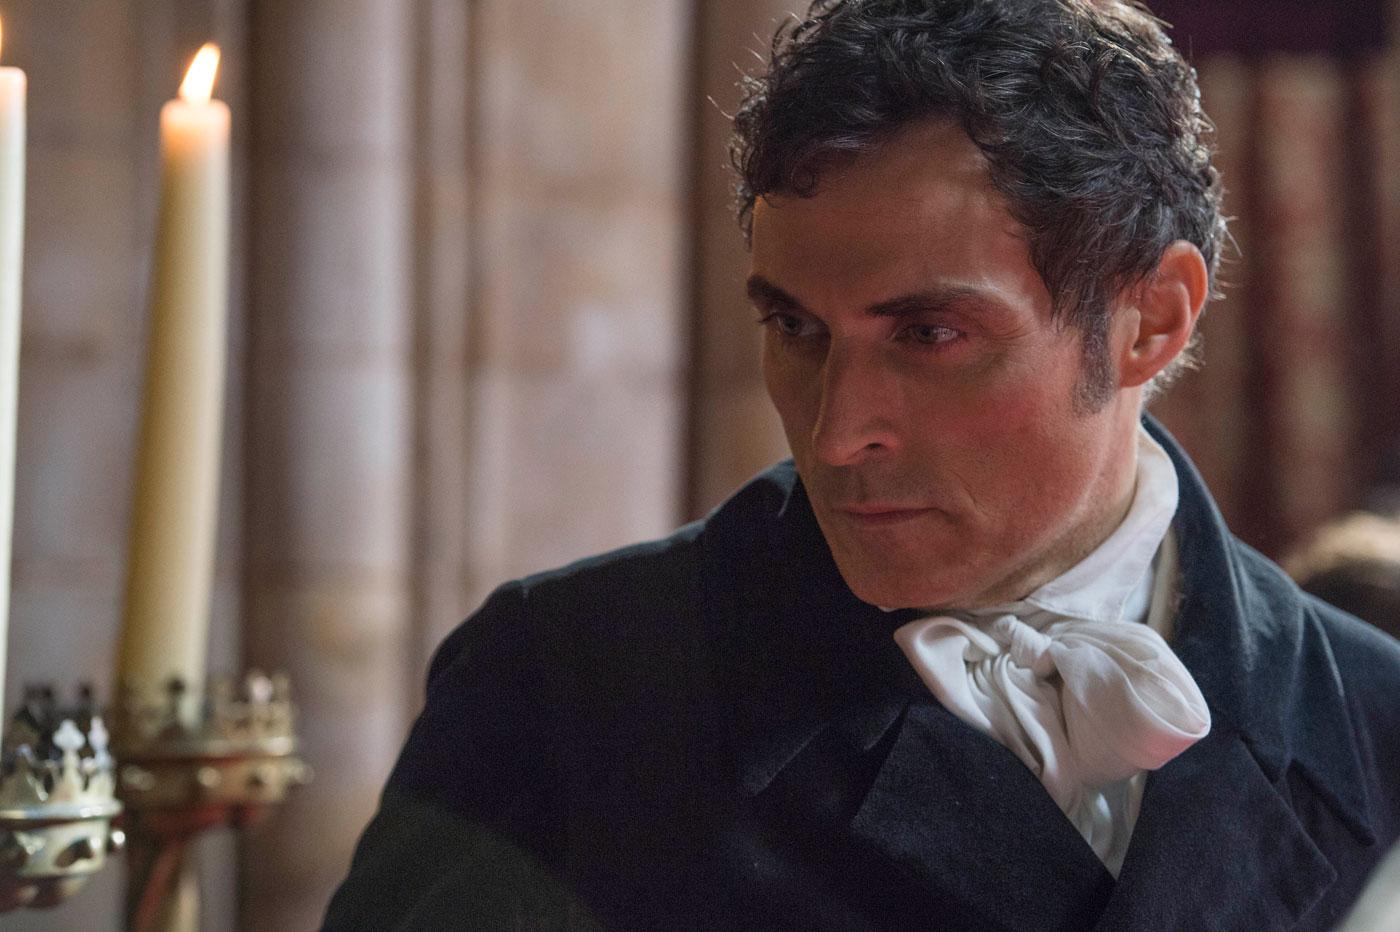 Victoria wants Lord Melbourne to be more than just a mentor. (ITV Plc)